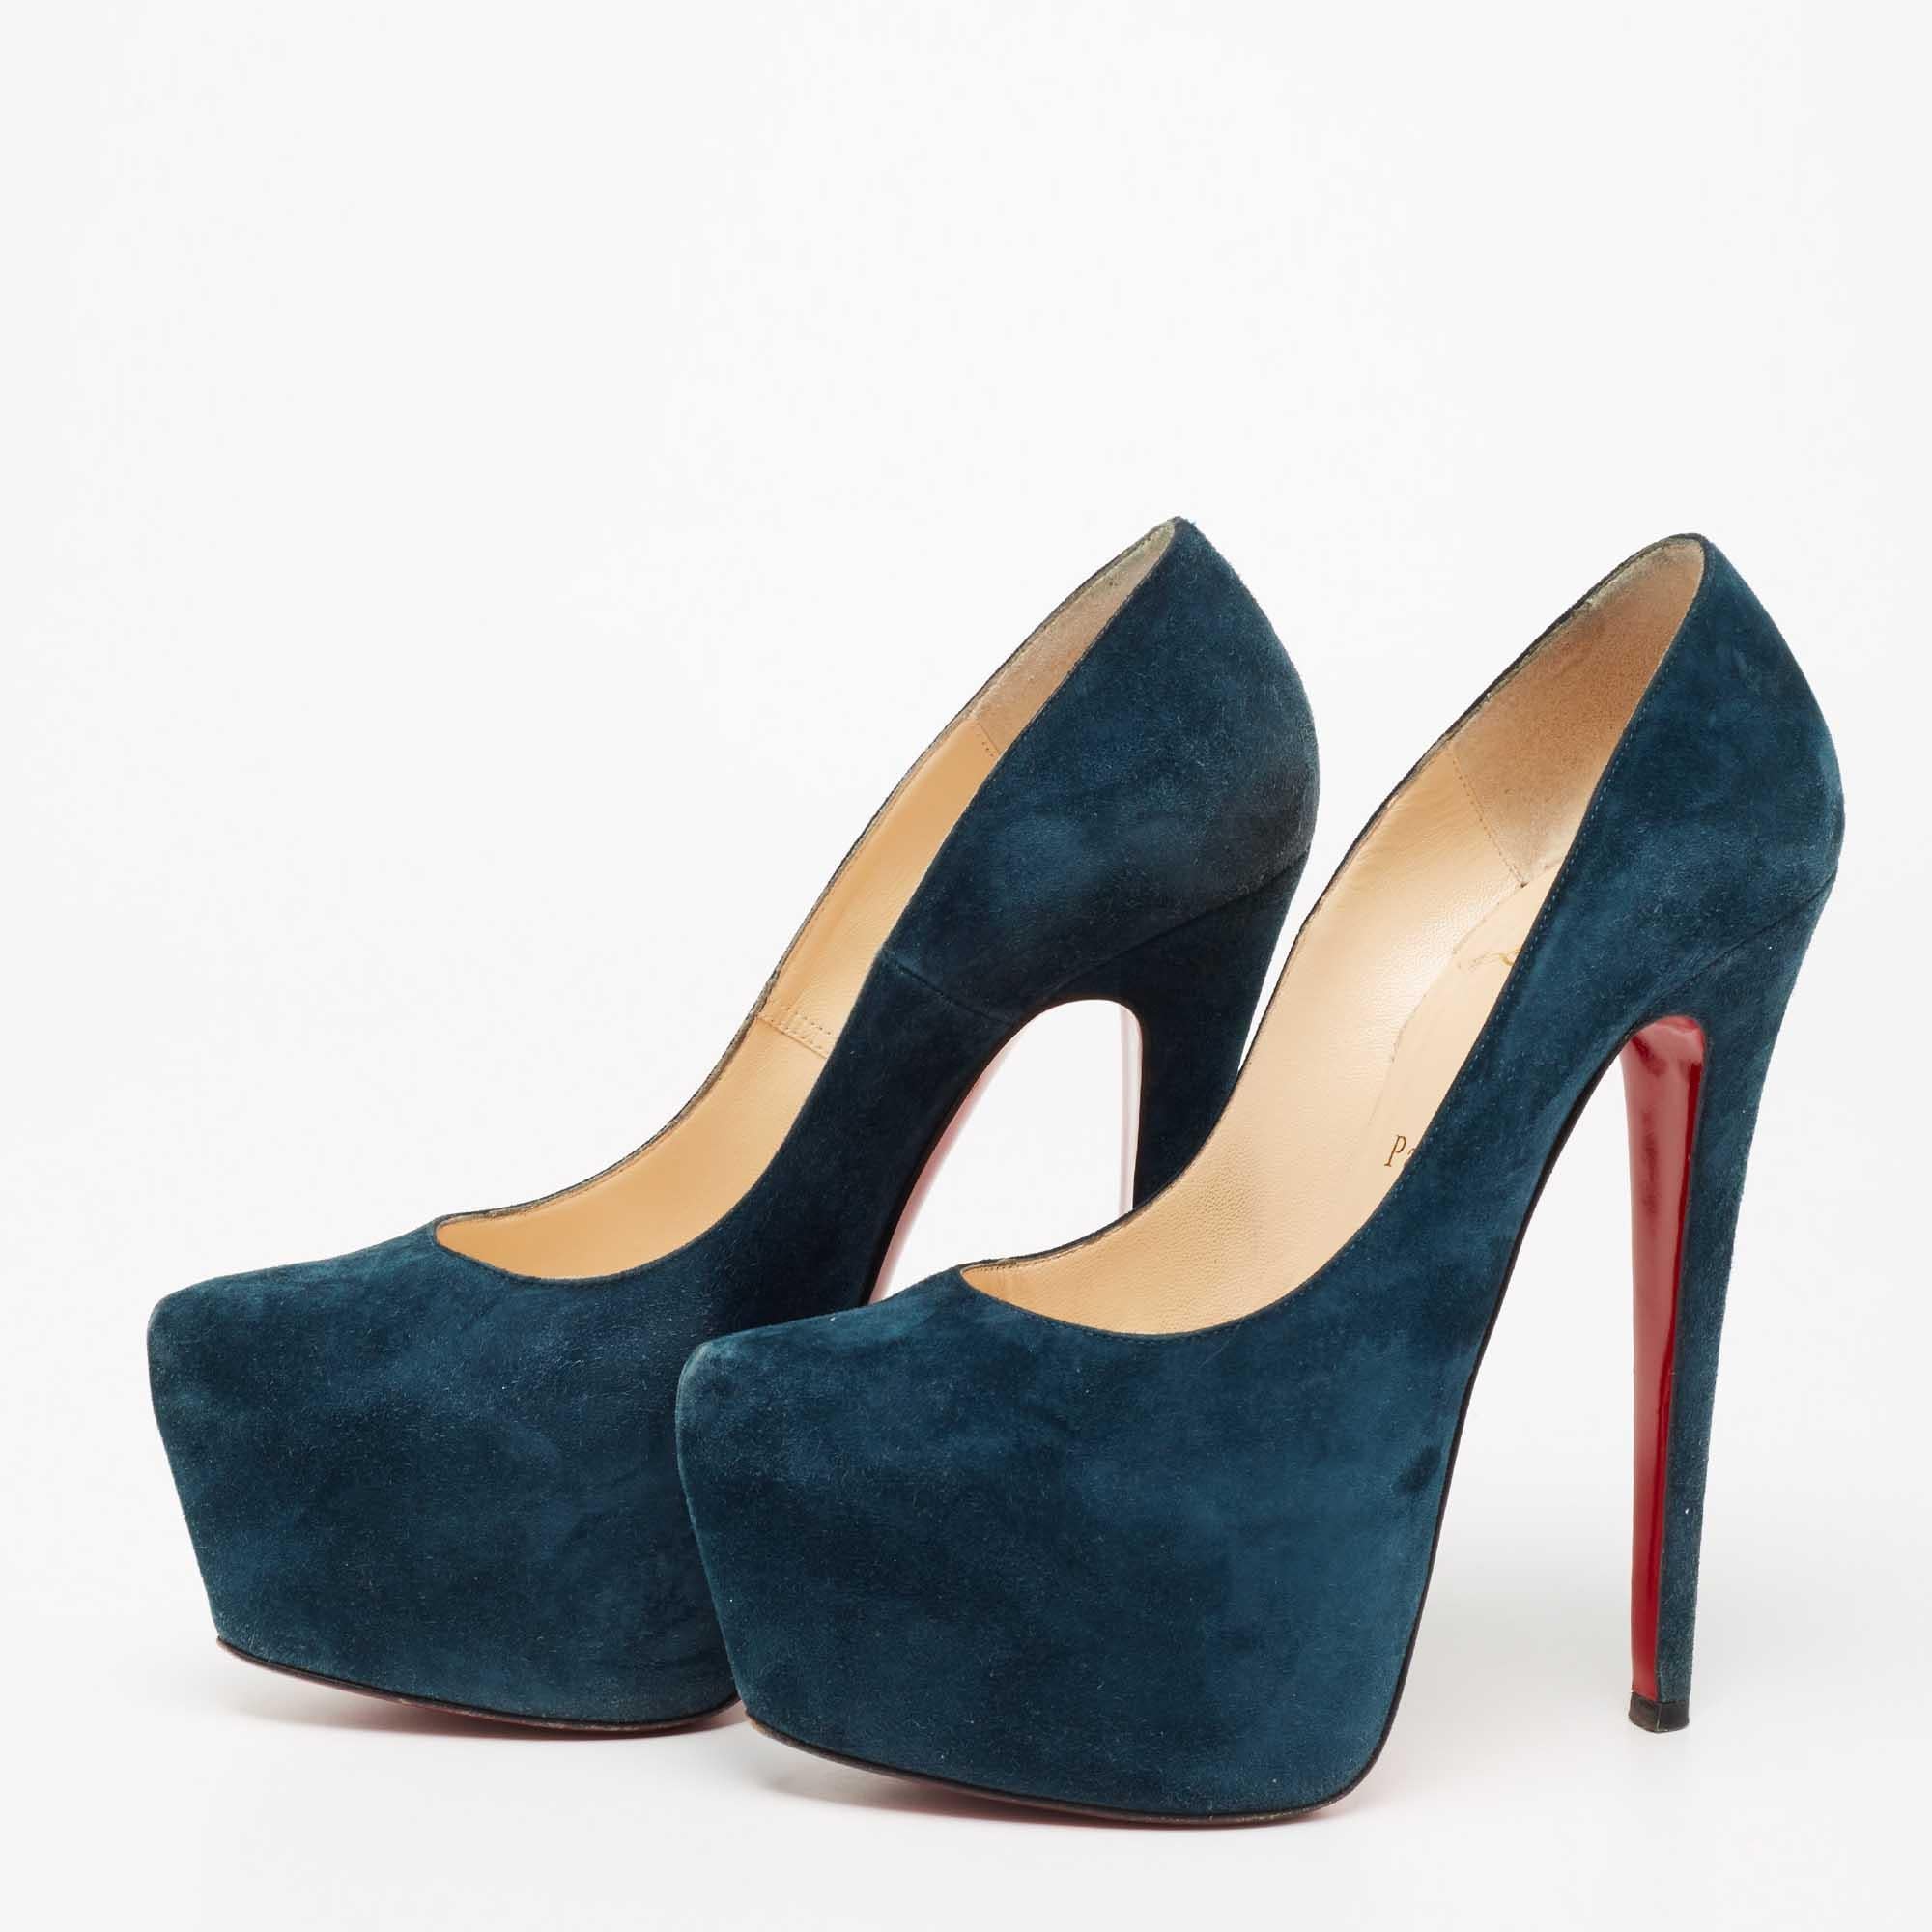 Take every step with elegance and style in these Daffodile pumps from the House of Christian Louboutin. They are crafted meticulously using dark-teal suede. They showcase thick platforms, towering heels, and a slip-on feature. These beautiful CL